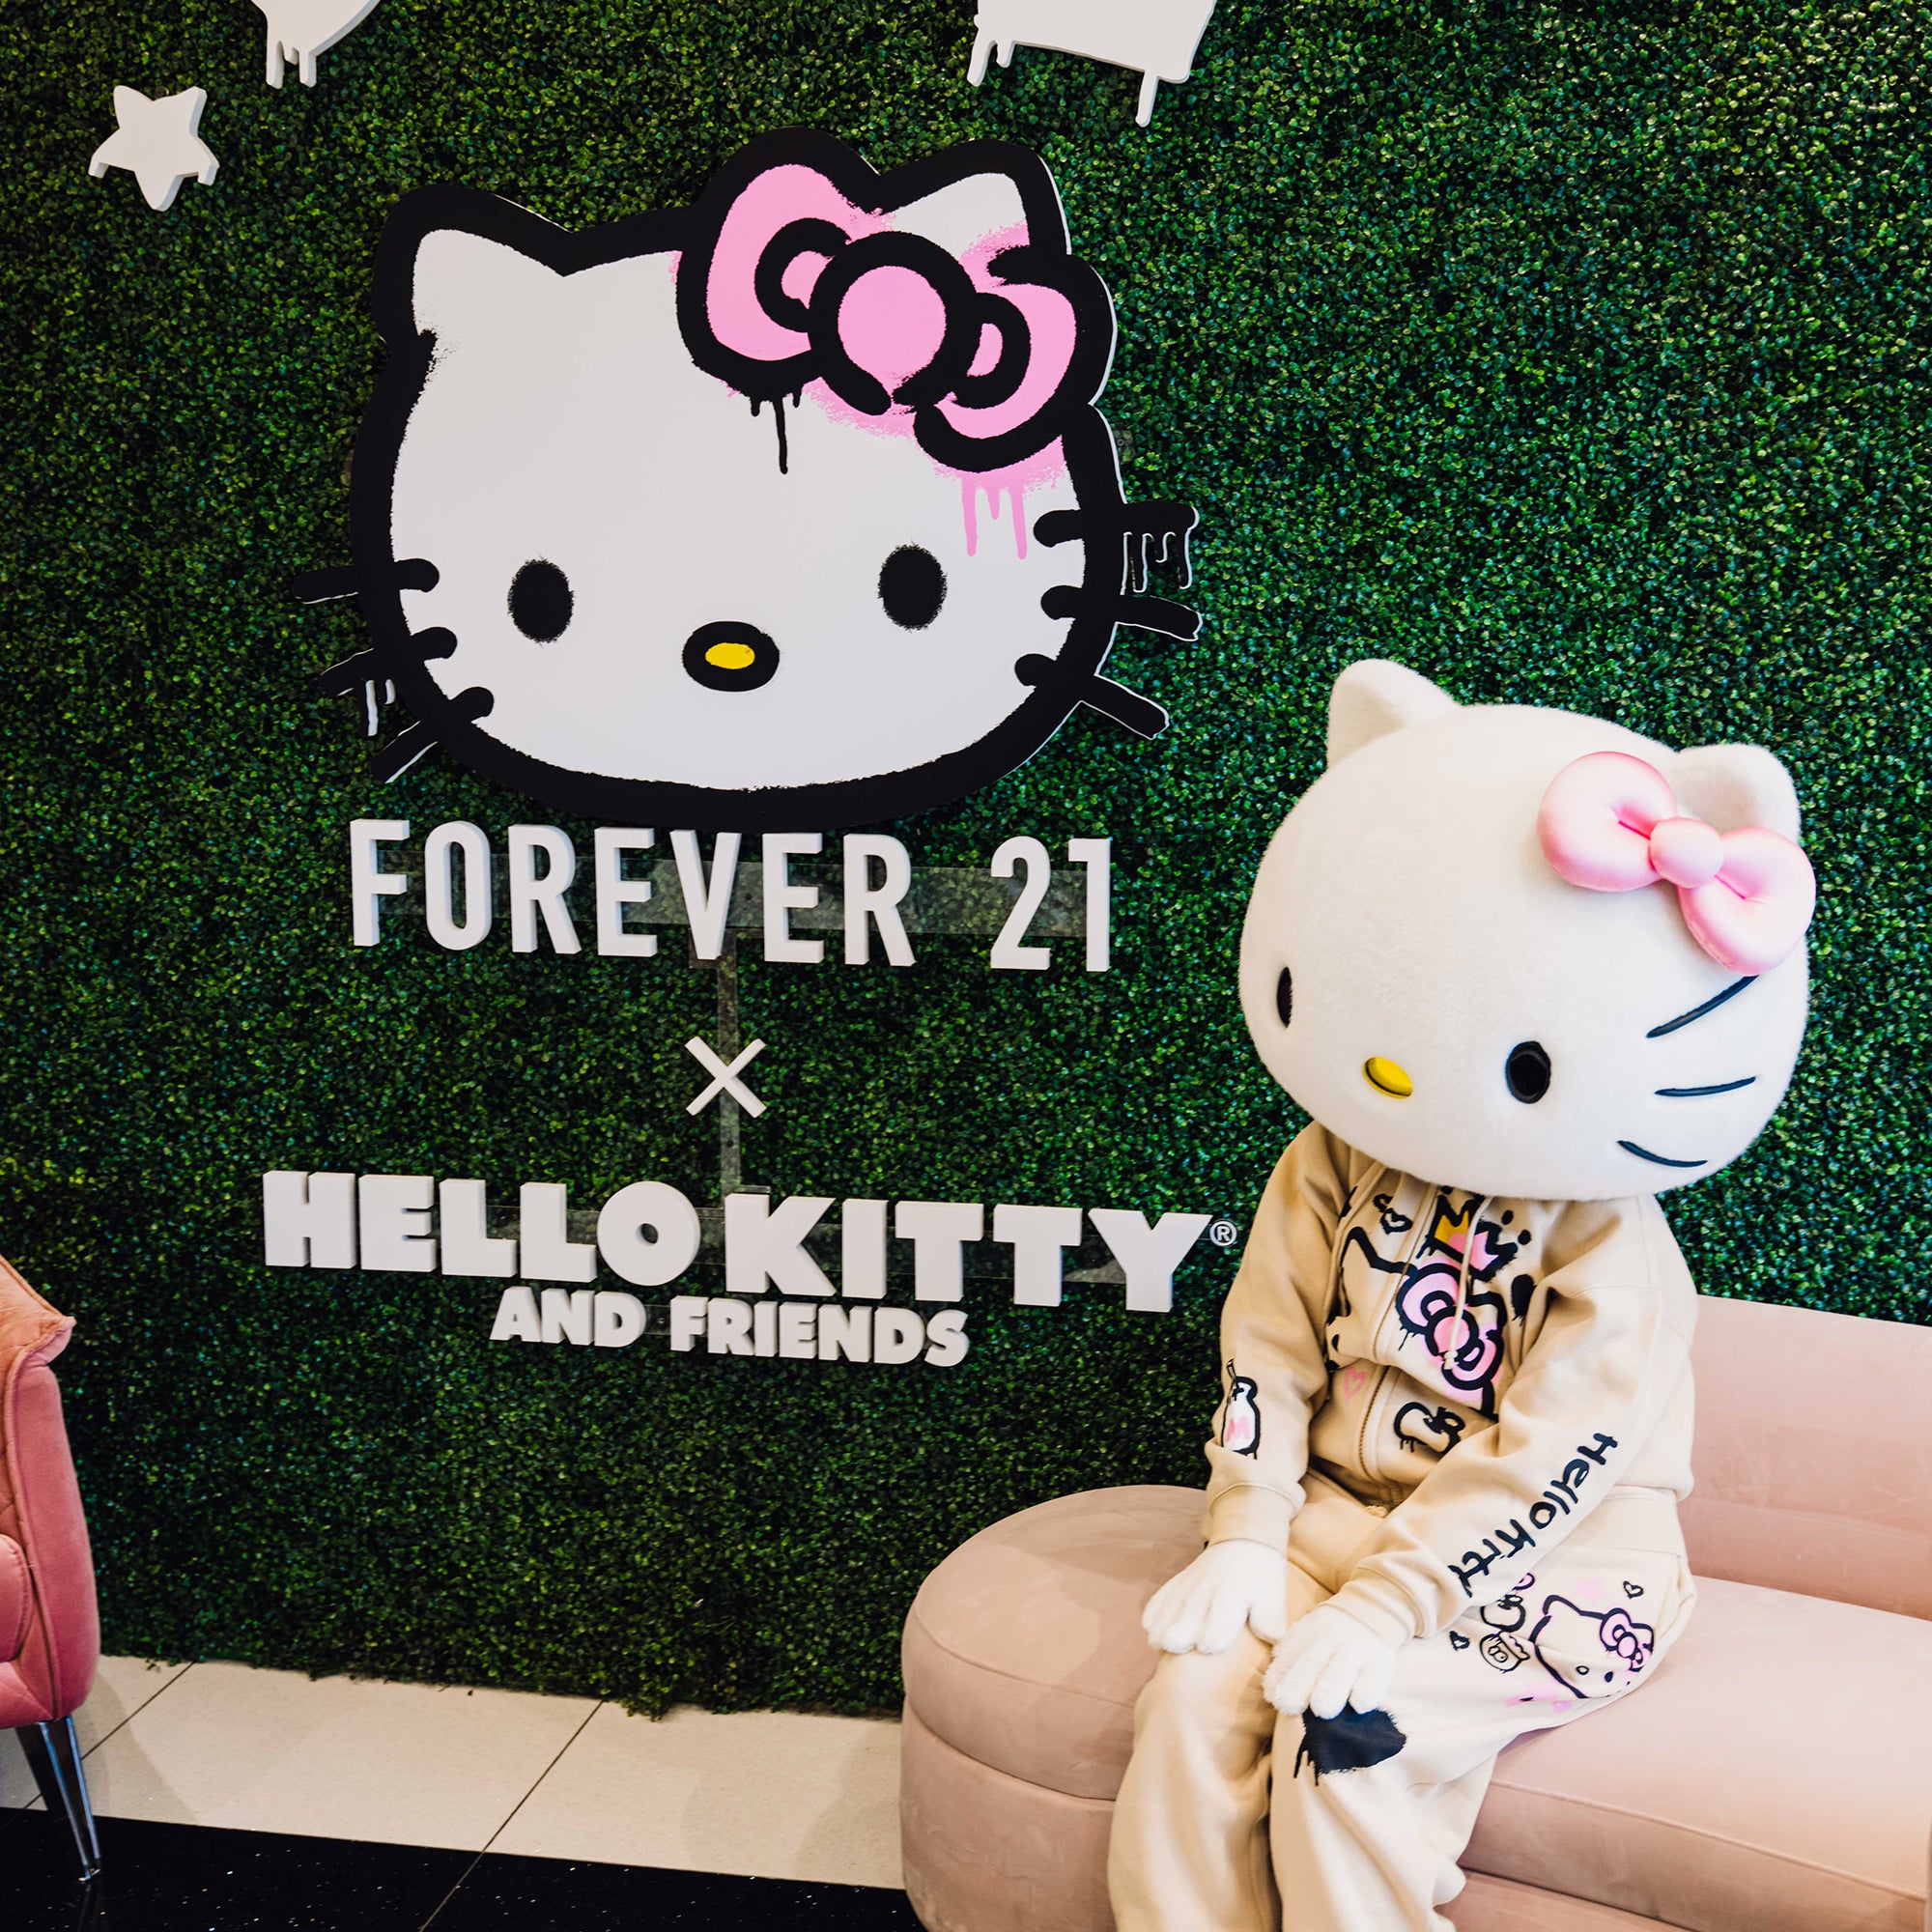 An Exclusive First Look At Forever 21's Hello Kitty Forever Collection